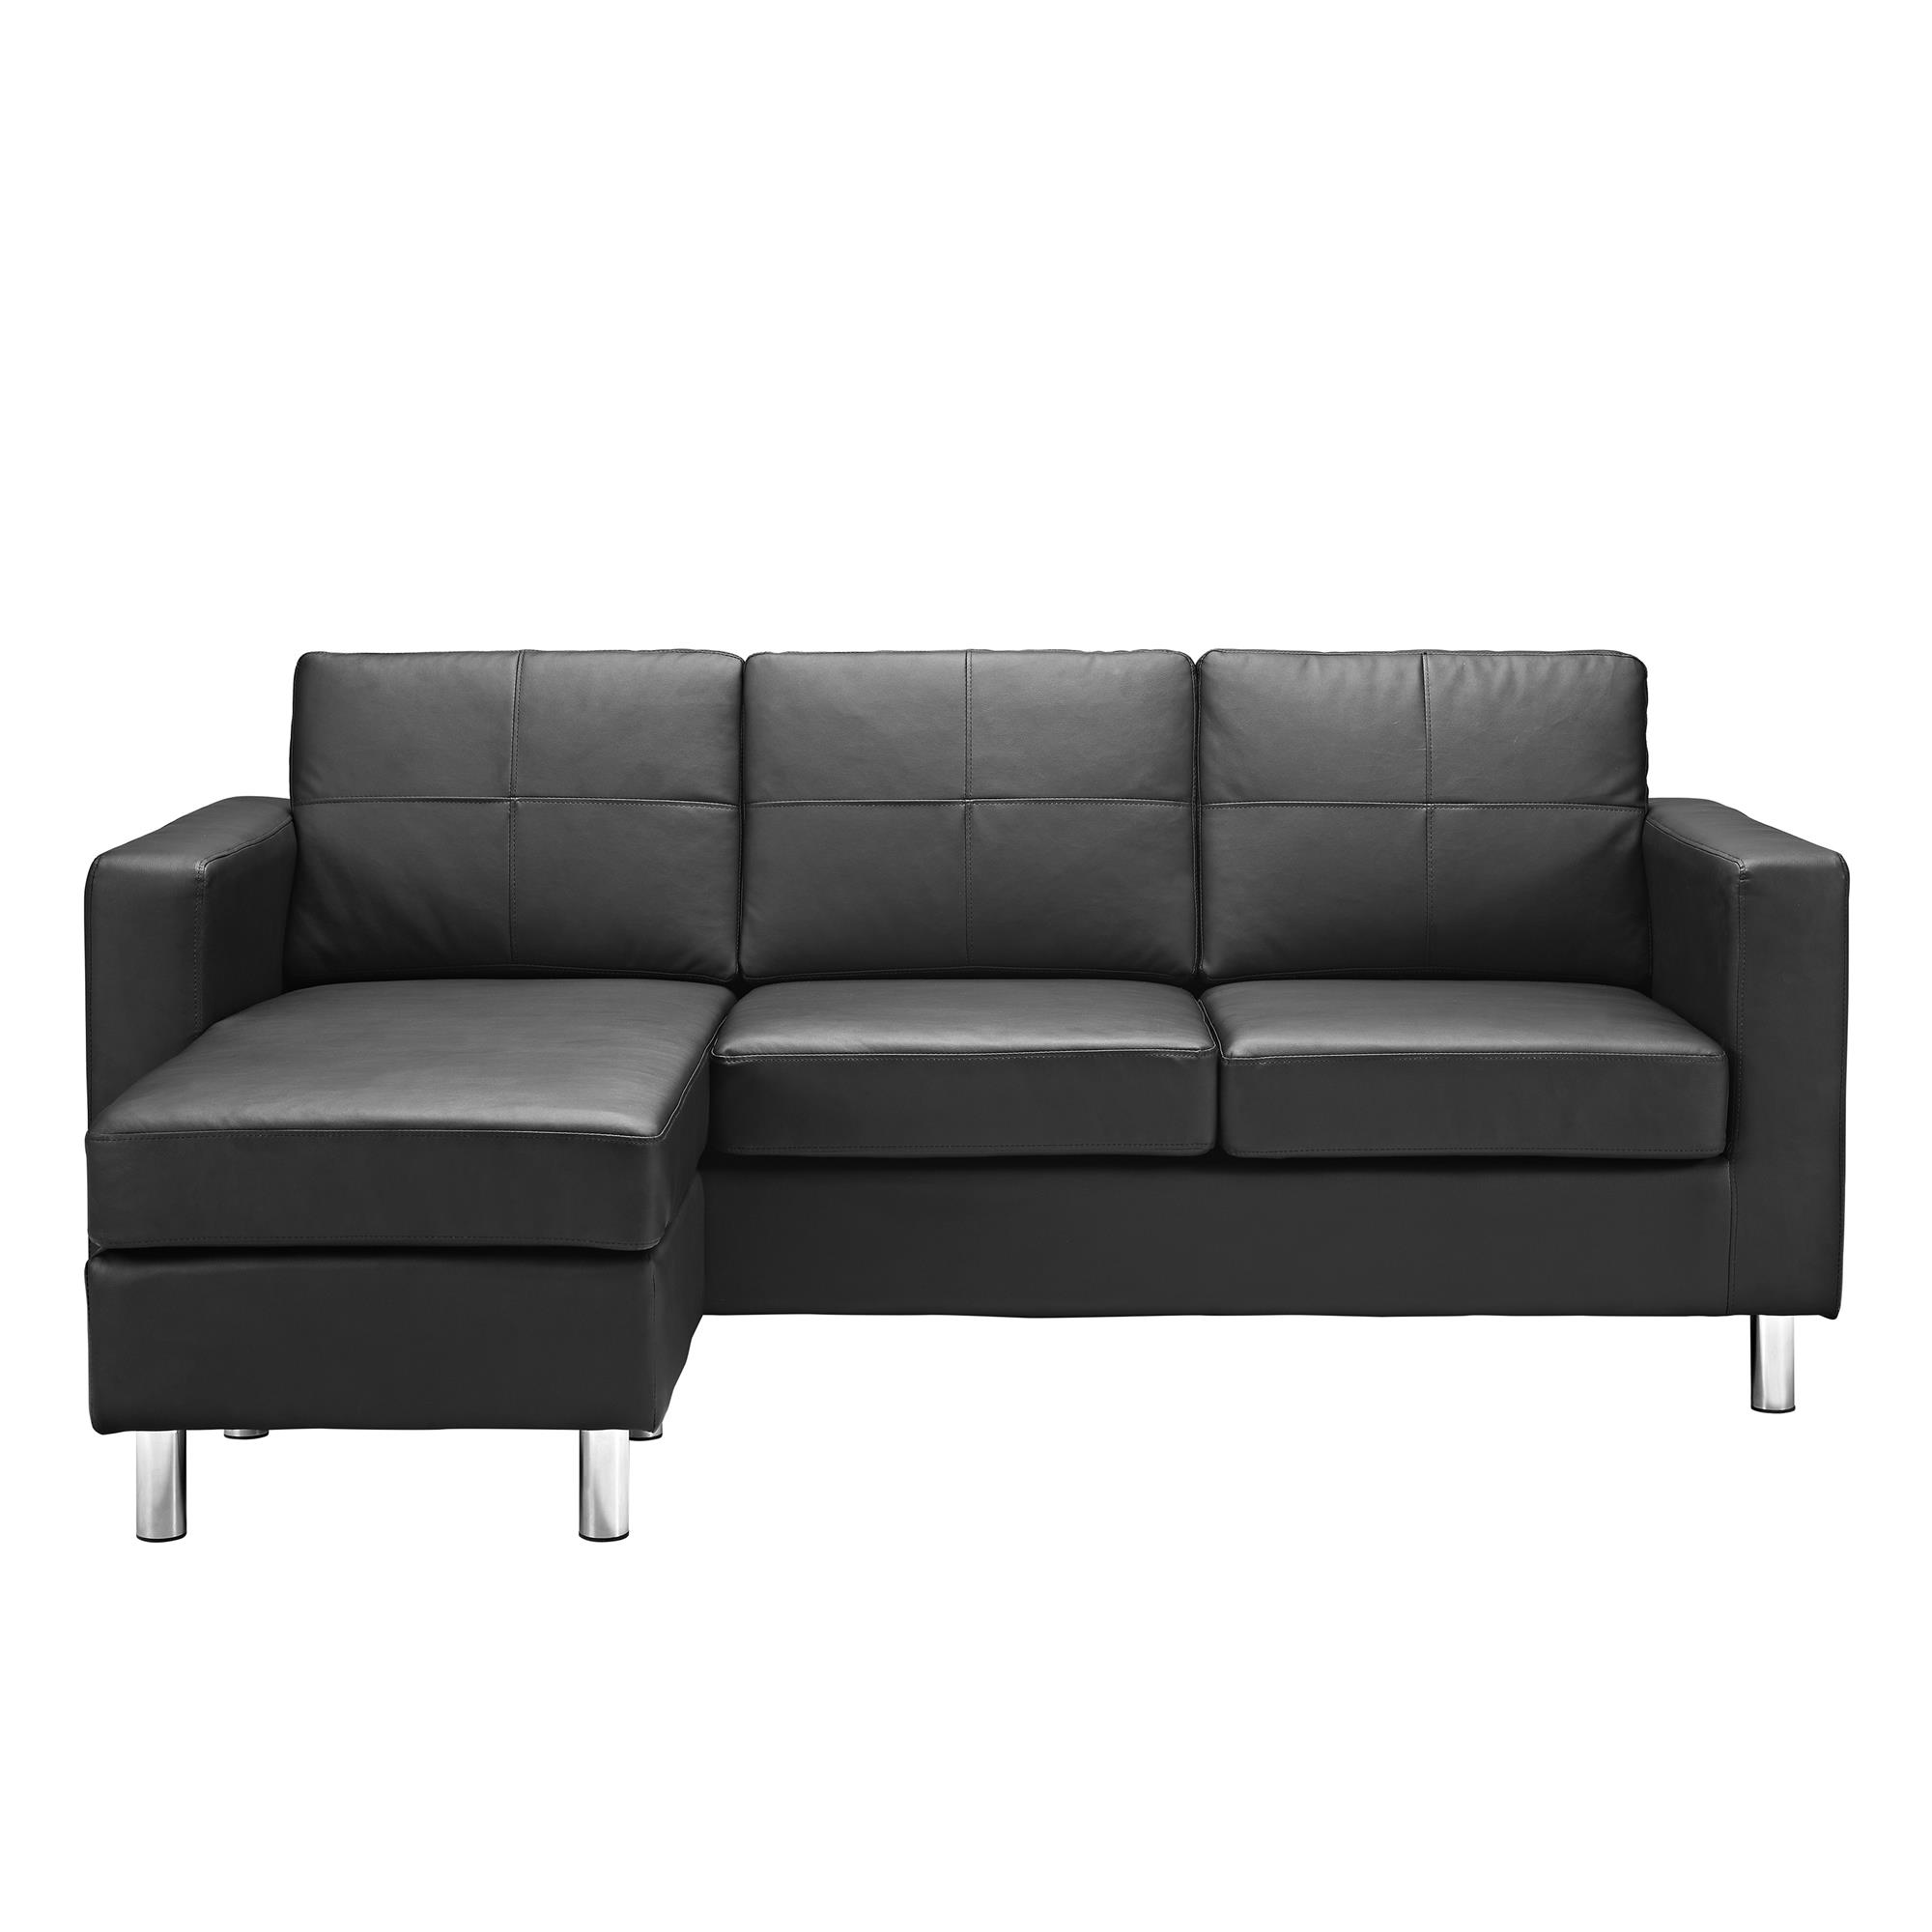 DHP Small Spaces Configurable Sectional Sofa, Multiple Colors - Black - image 4 of 6